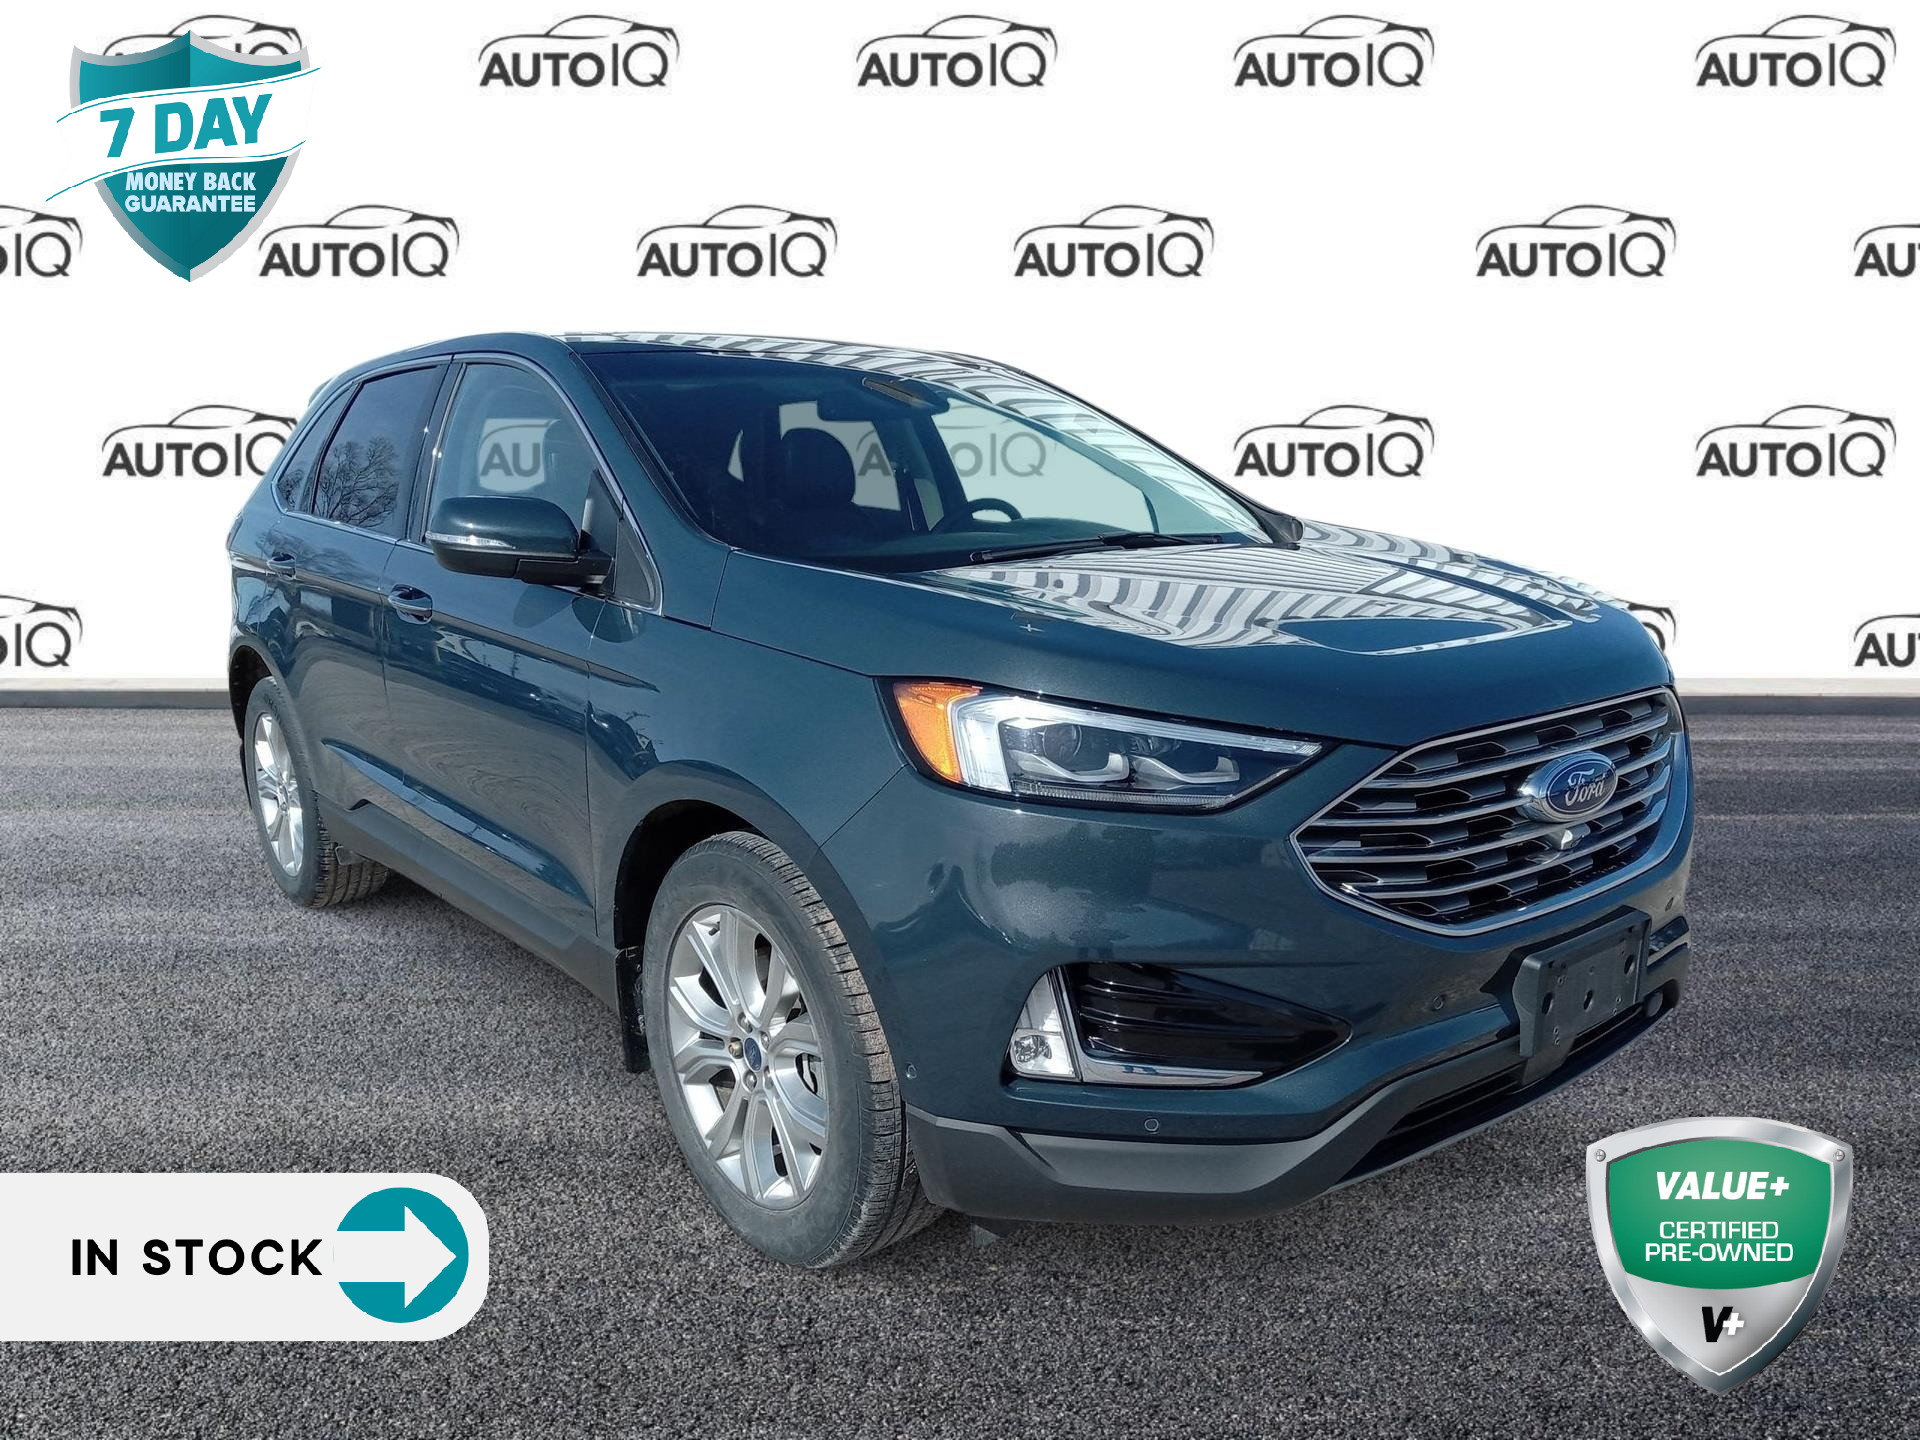 2019 Ford Edge Titanium 2.0L | PANORAMIC ROOF | HEATED SEATS AND 